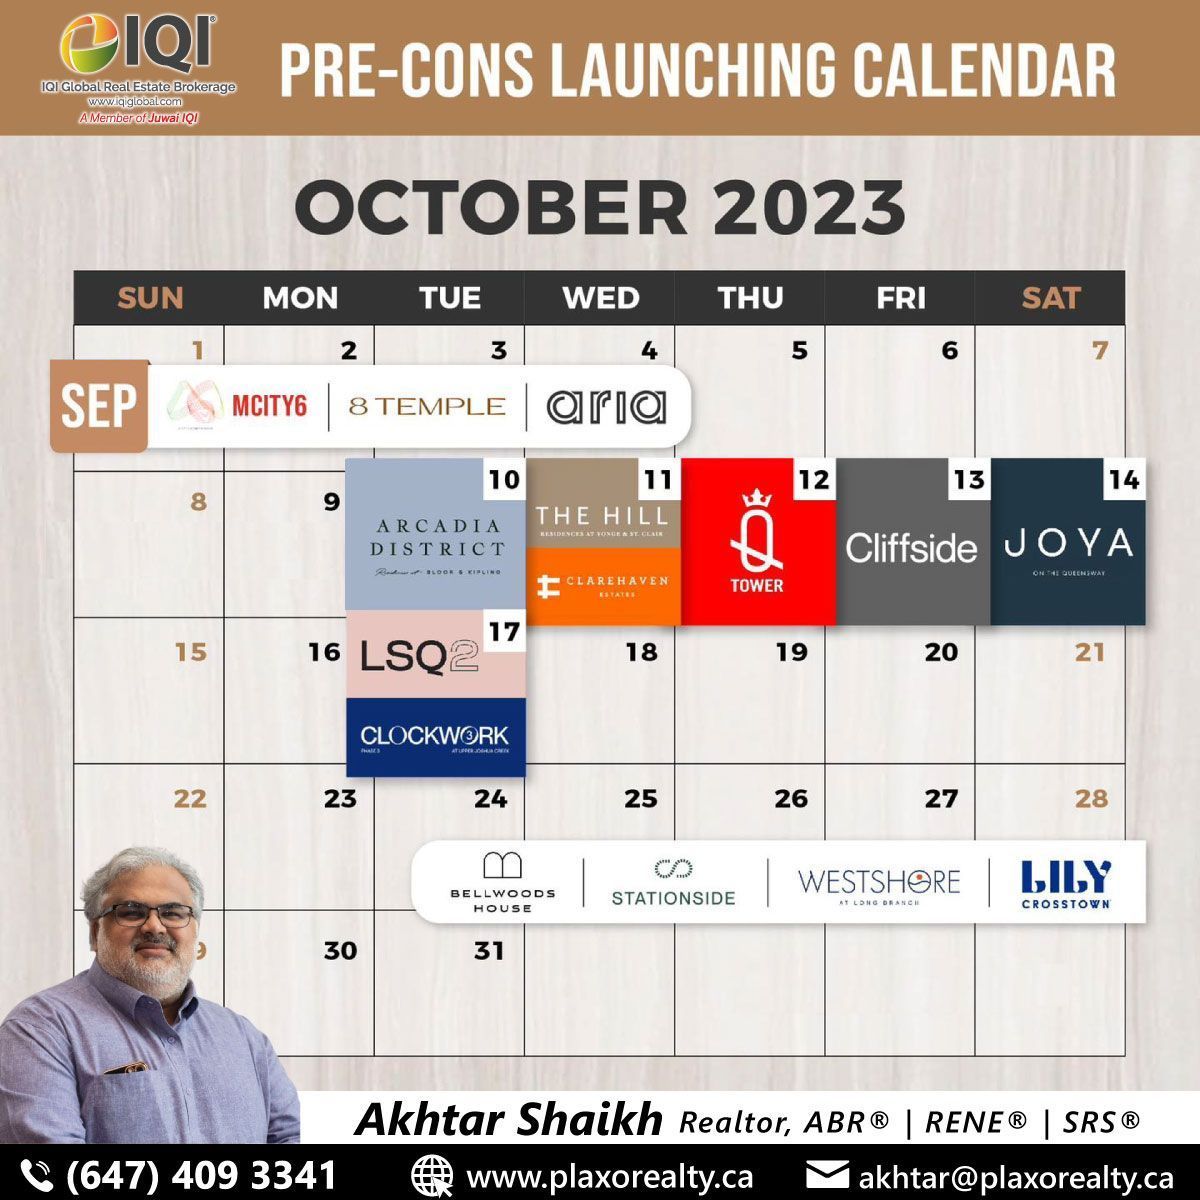 📅Mark Your Calendar! 💫 An exciting array of long-awaited projects are launching in October 2023!

#akhtariqi #akhtarshaikh #FTHS #FTHB #newhomes #Toronto #torontocondos #torontocondosforsale #condoliving #downtowntoronto #gtacondos #gtahomes #townhomes #townhouses #freehold